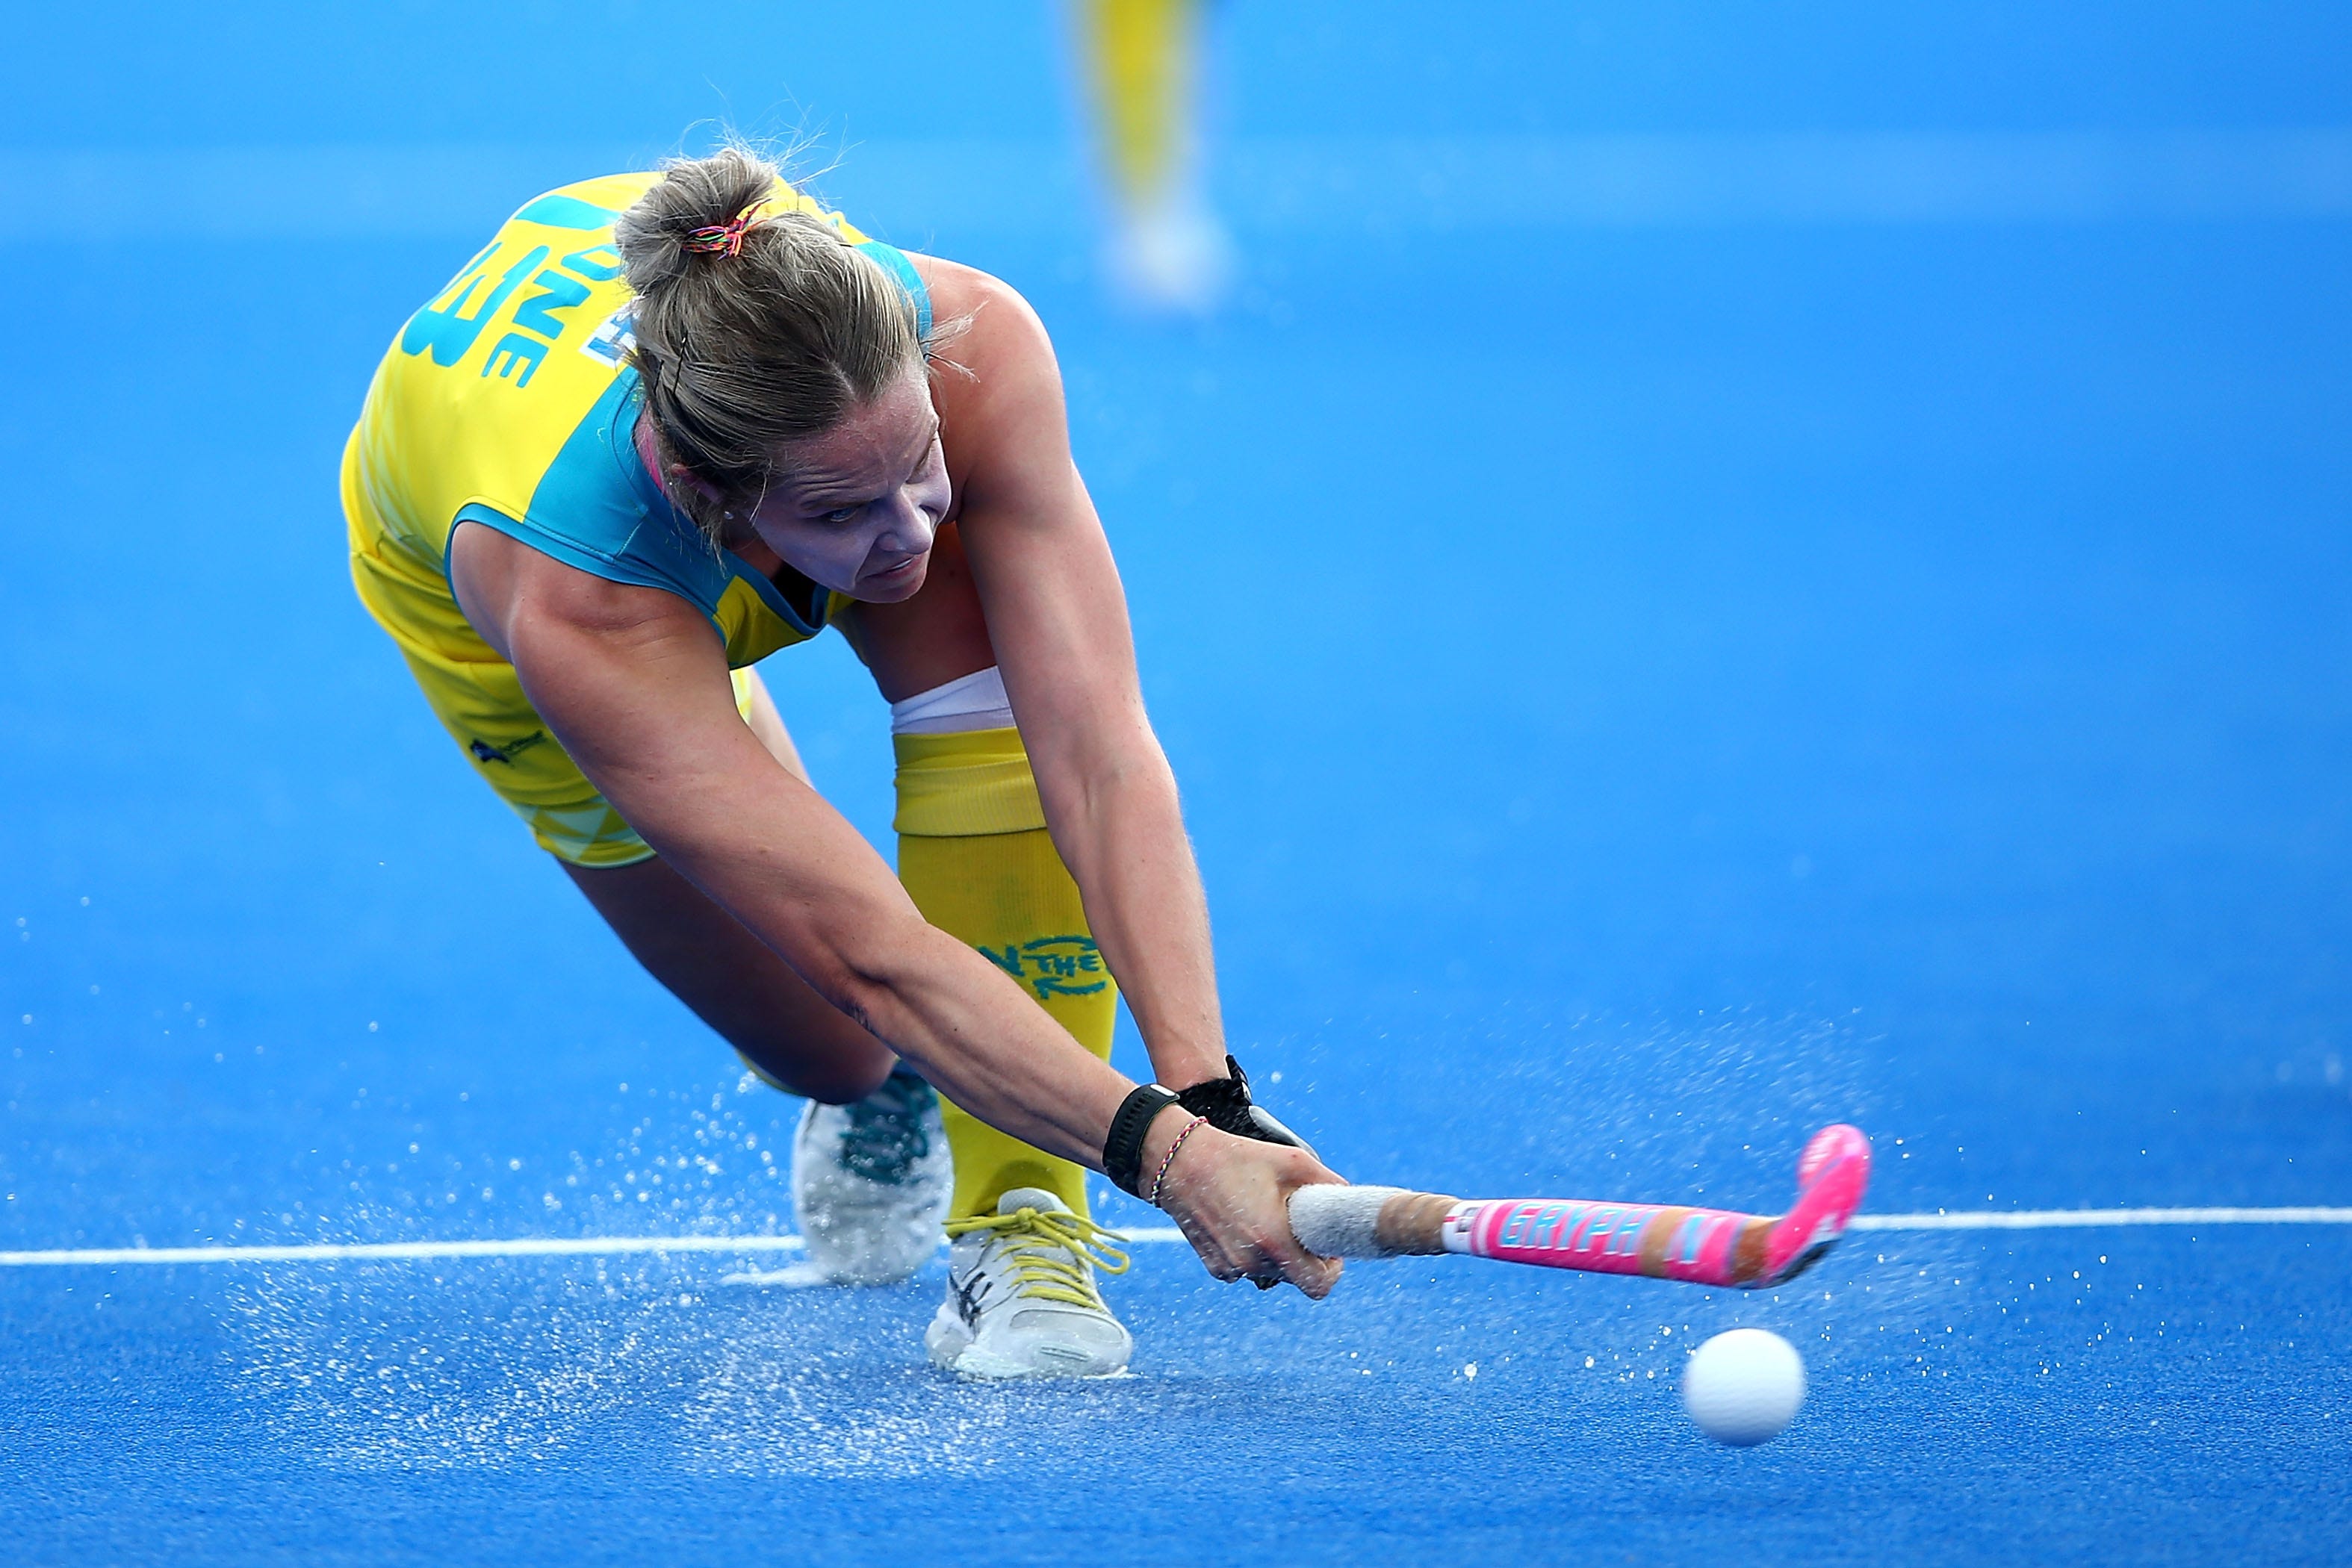 Edwina Bone of Australia in action during the Pool D game between Australia and New Zealand of the FIH Women's Hockey World Cup at Lee Valley Hockey and Tennis Centre in London.